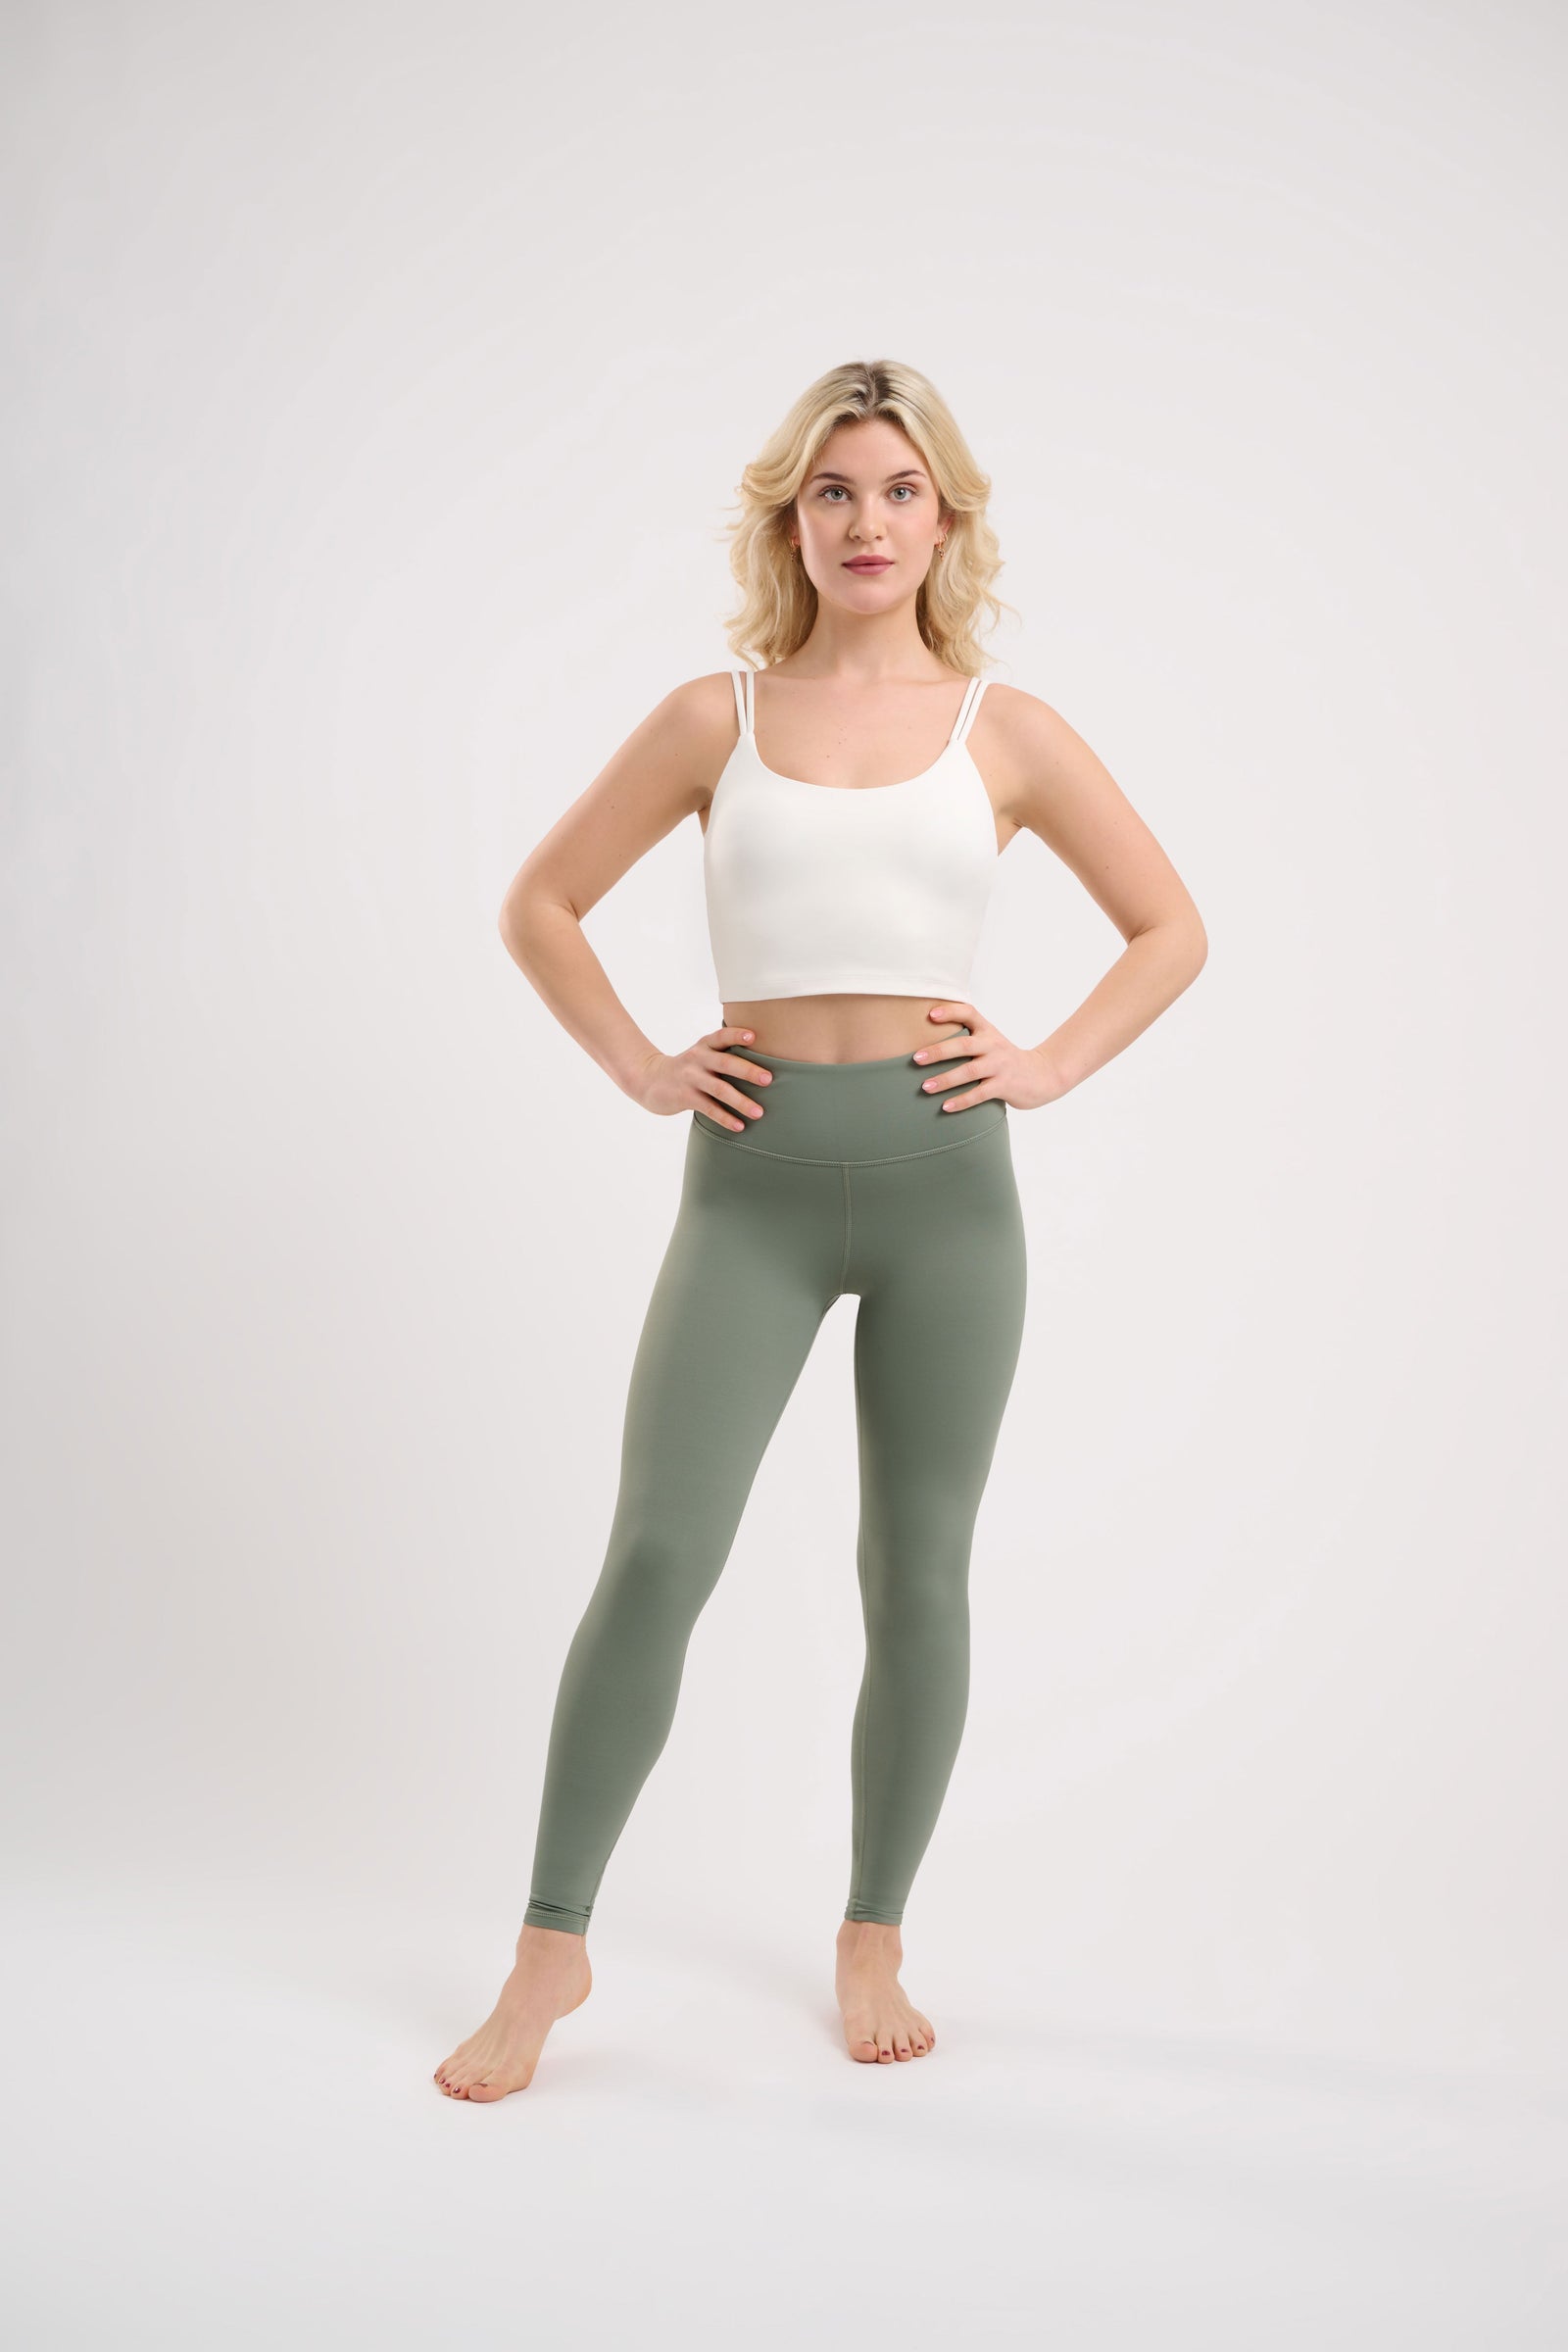 Orchid High Waisted Yoga Pants - Planet Warrior